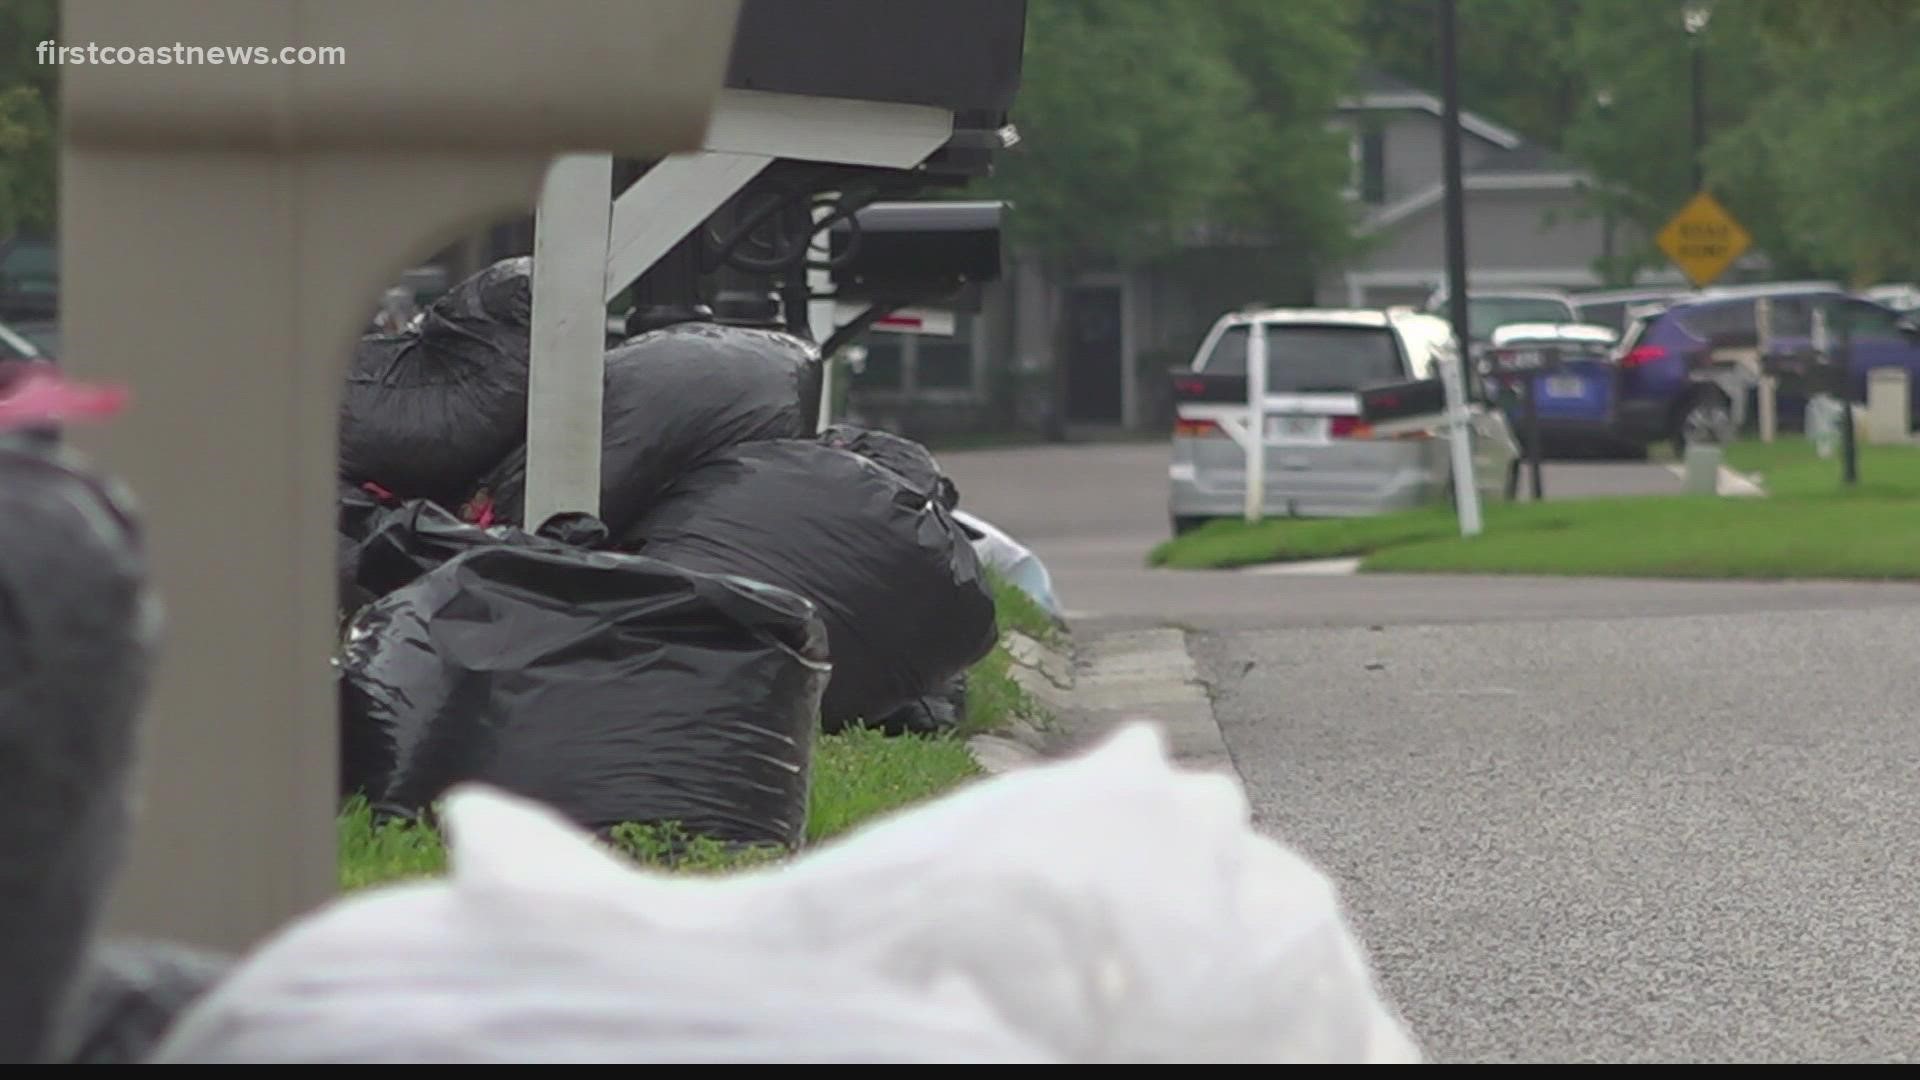 Yard waste is an ongoing issue for one Westside neighborhood.